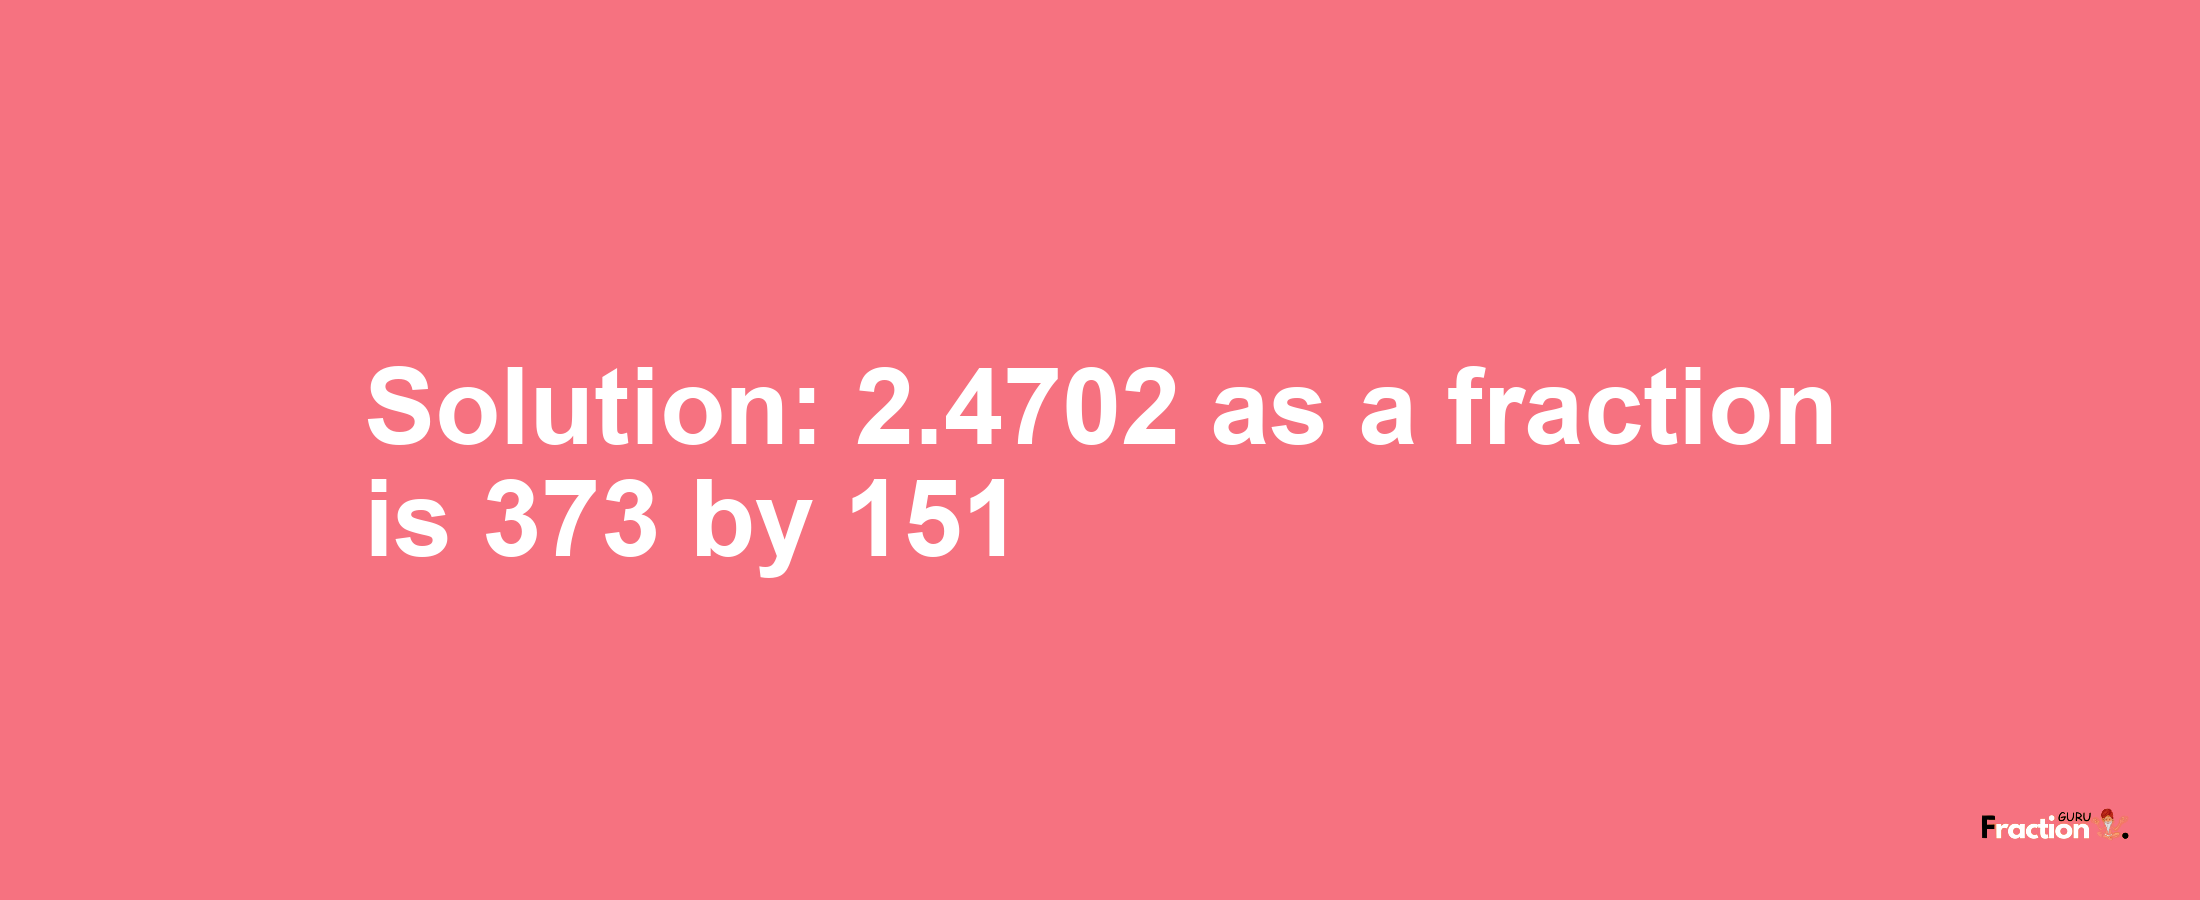 Solution:2.4702 as a fraction is 373/151